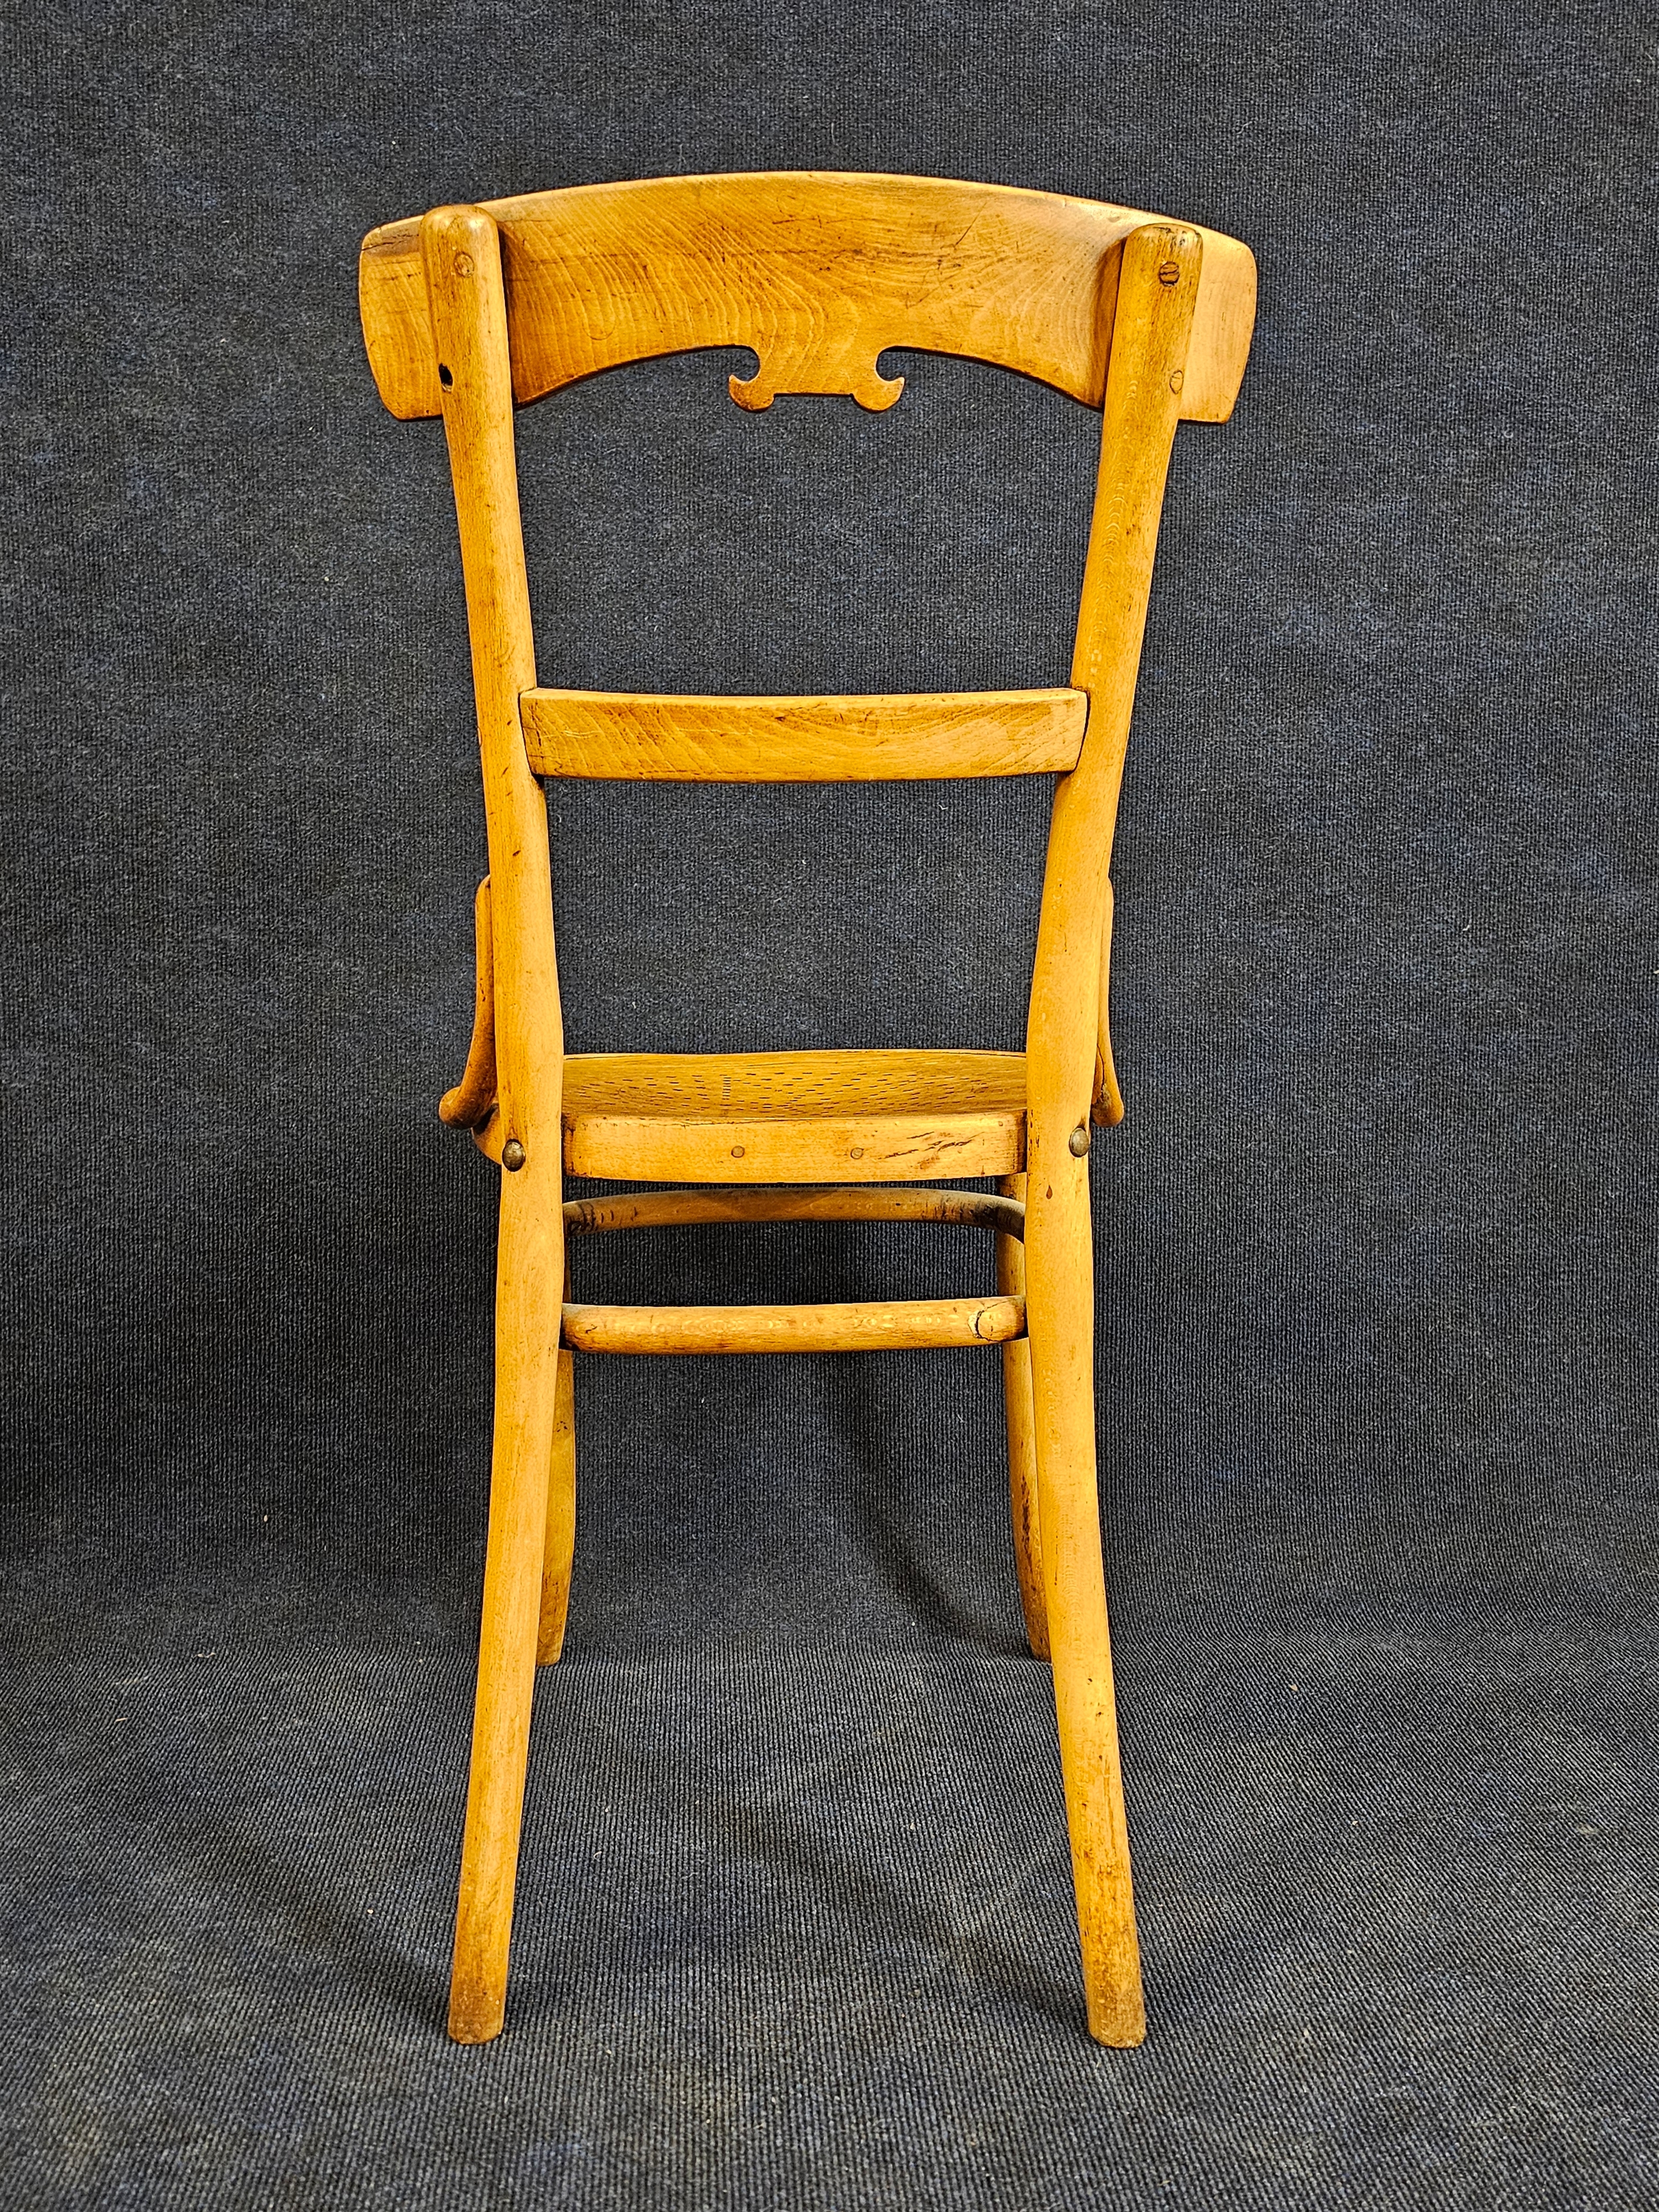 A 1920's bentwood chair - Image 8 of 8